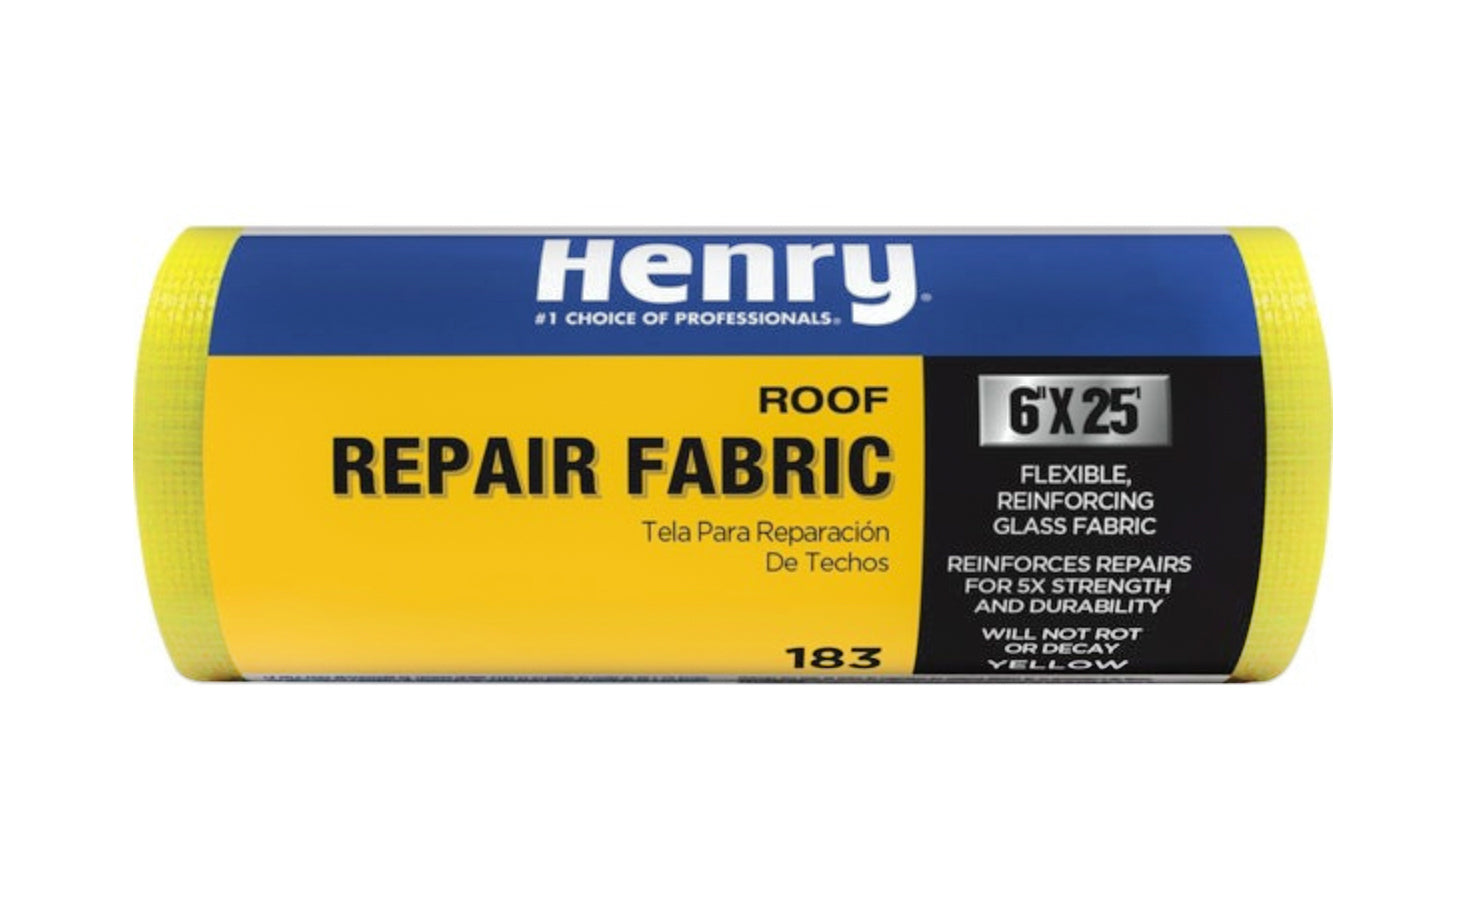 Henry Roof Repair Fabric. Yellow resin-coated glass fabric is a woven fabric made of yarns of inert, flexible filaments of pure glass. 6